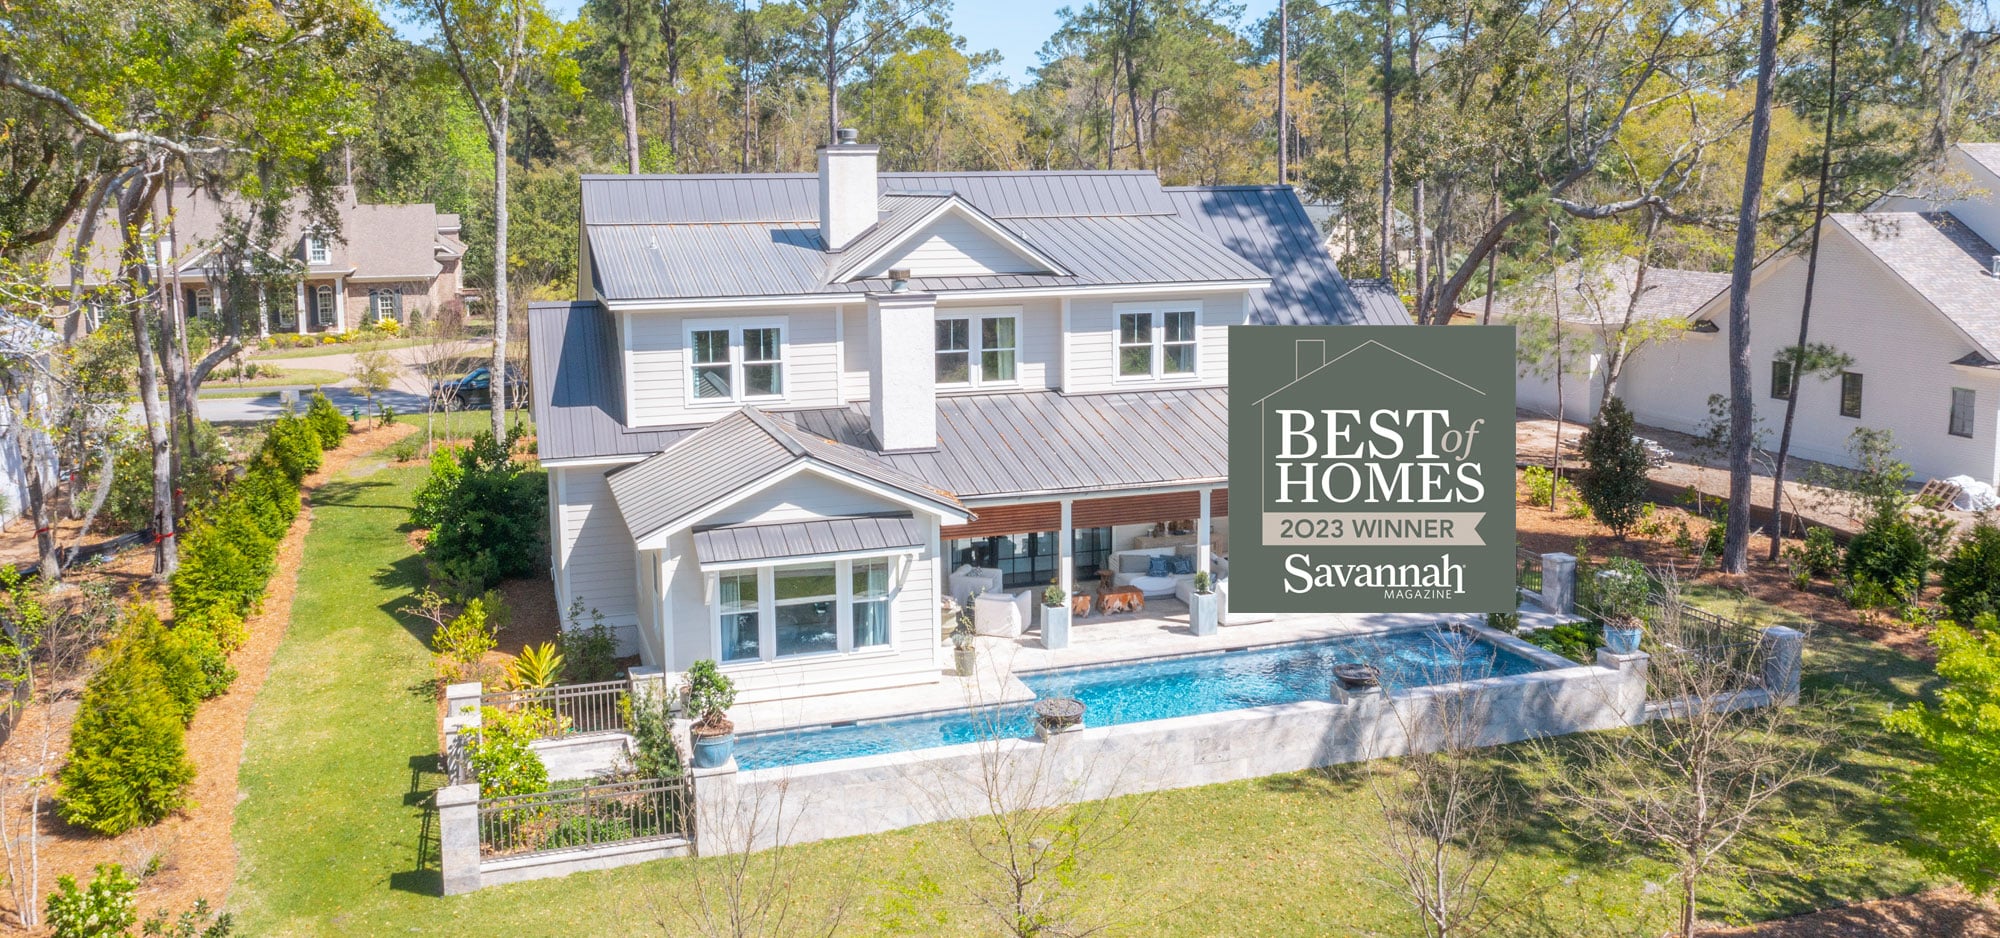 The back yard of one of the beautiful homes in The Landings, named one of the best planned communities in Savannah.